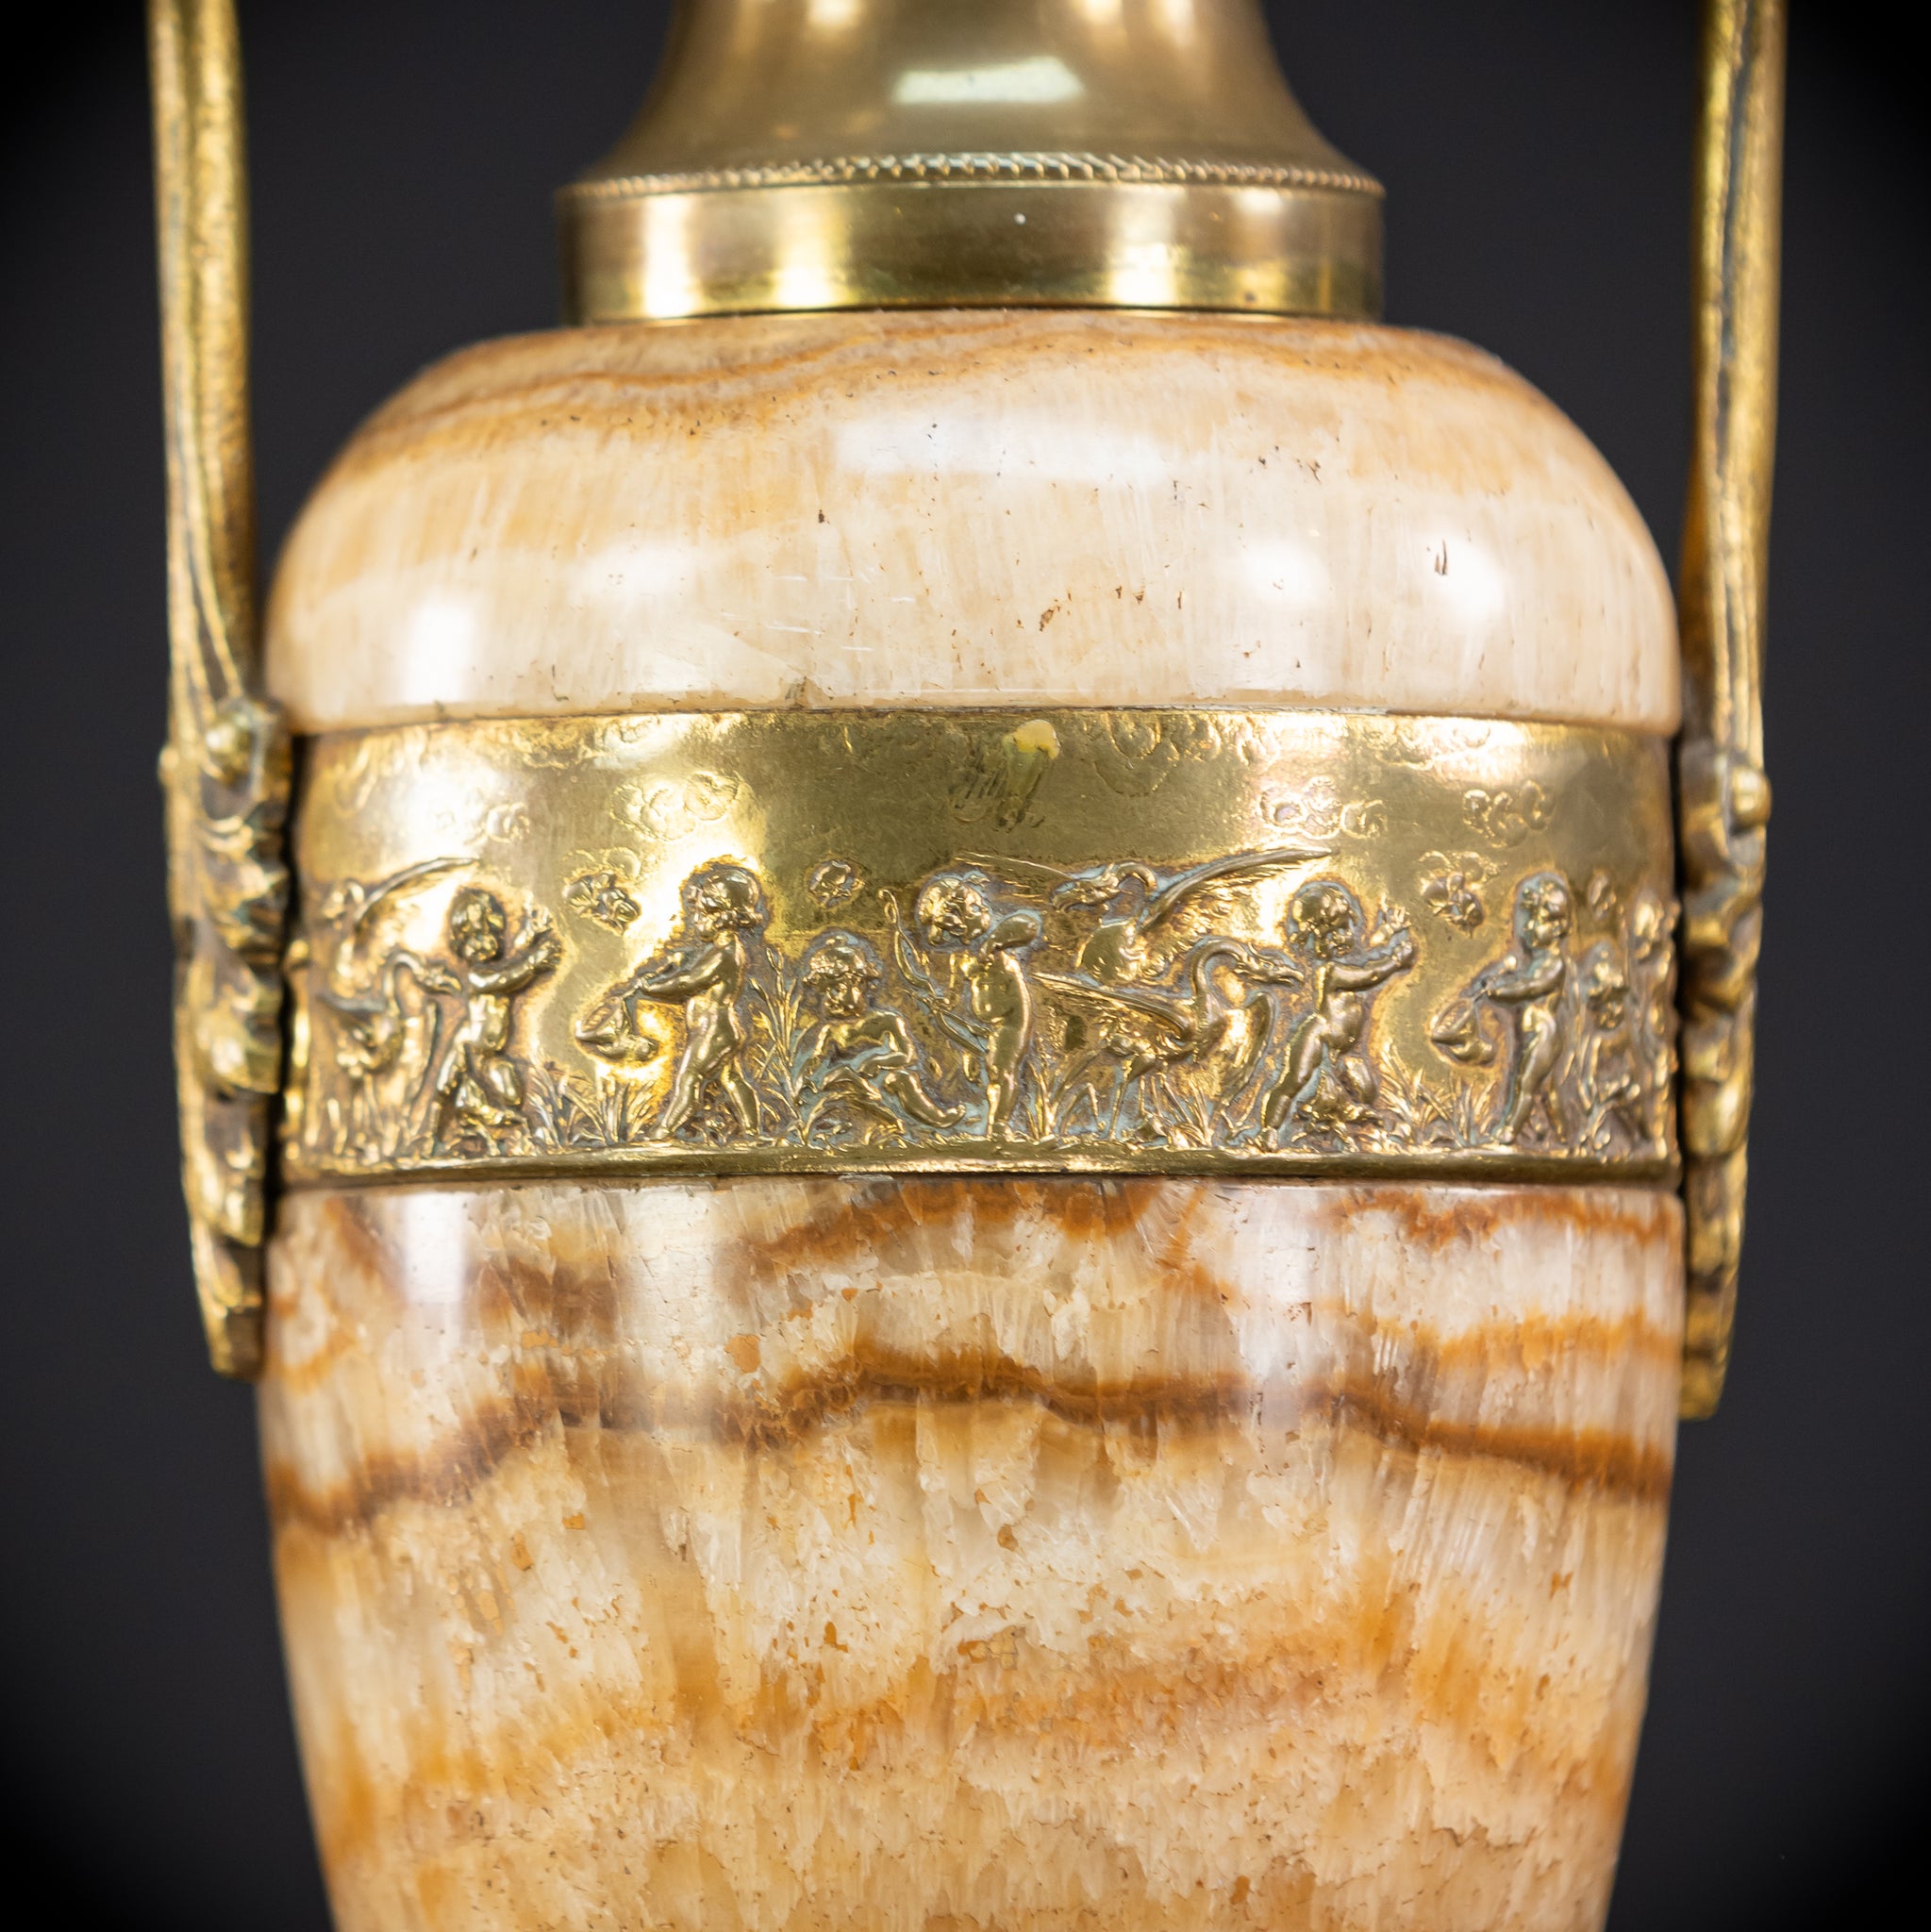 Pair of Marble and Gilt Bronze Urns | 1800s Antique | 14.2" / 36 cm